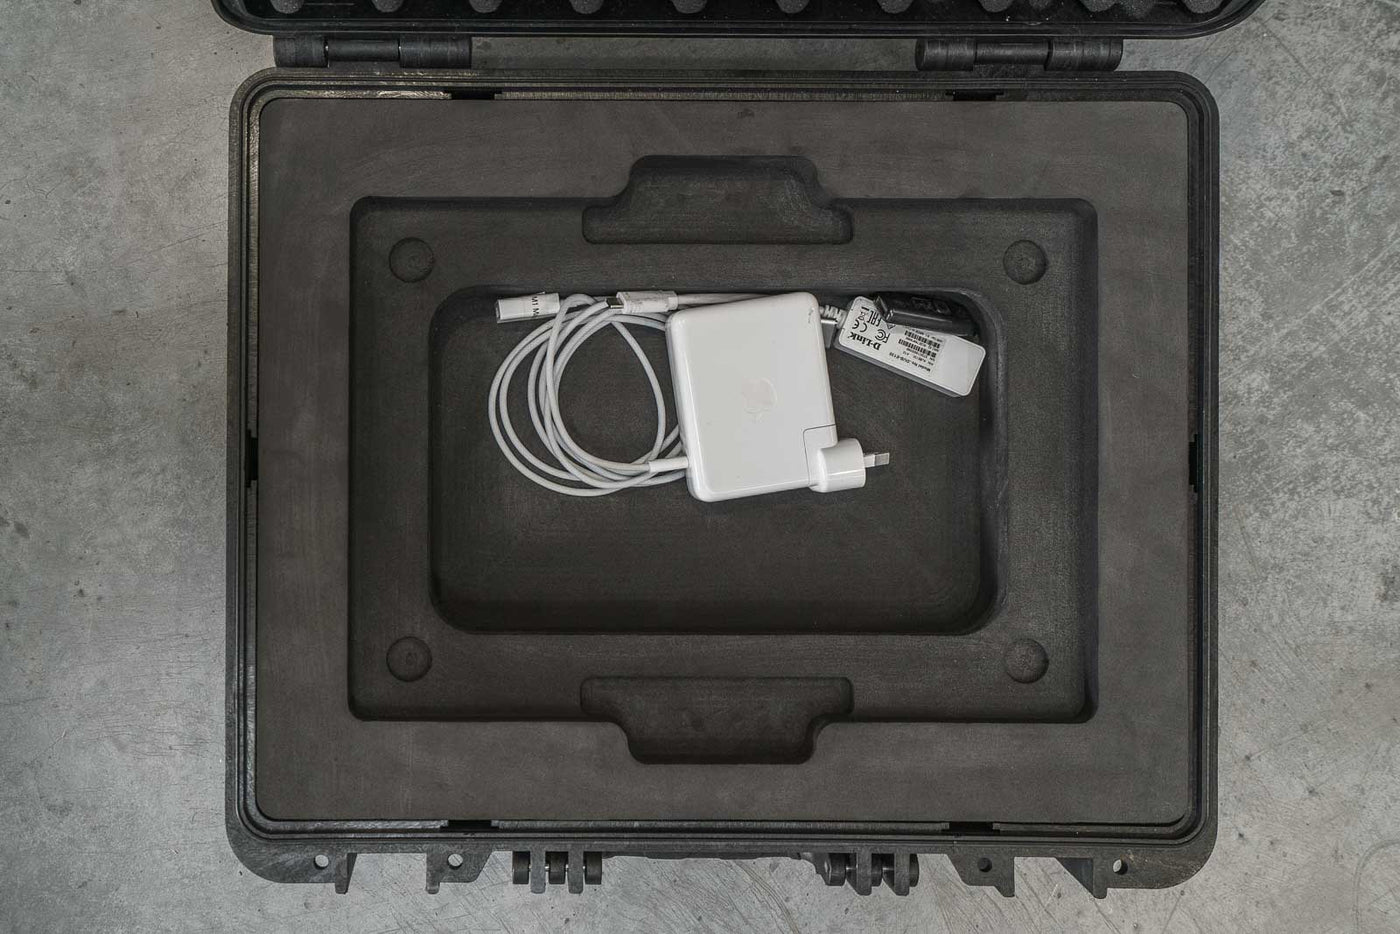 Hard carry case for MacBook Pro and accessories 